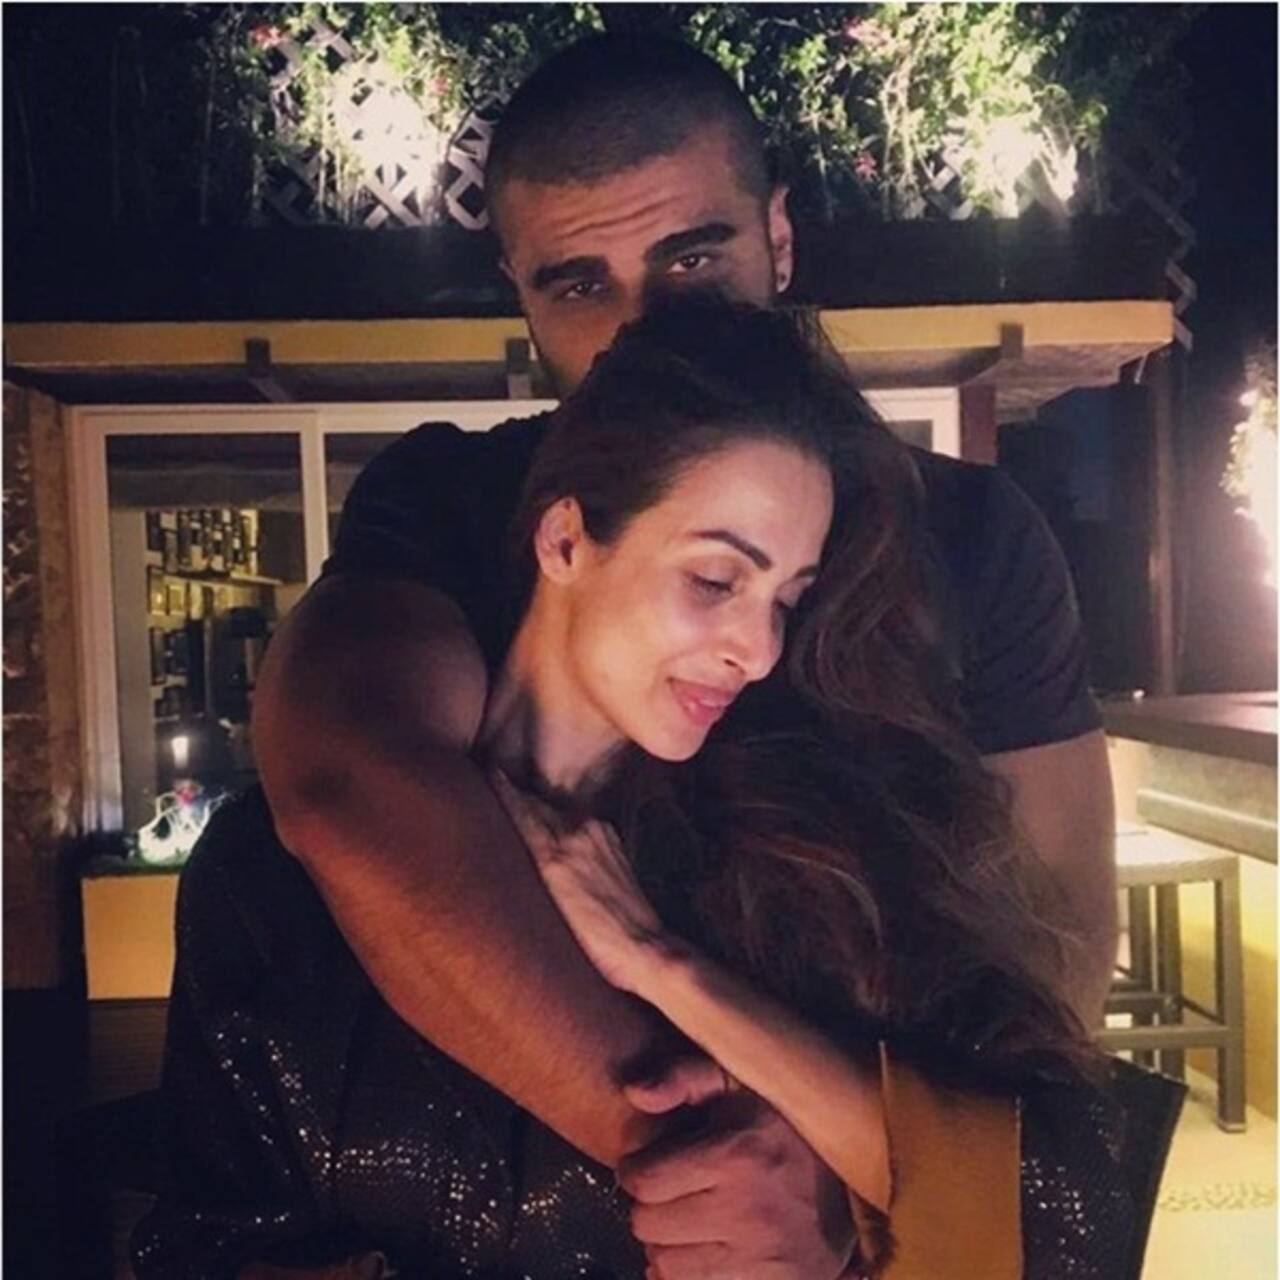 Malaika Arora says she is not ruining a 12-year-old younger Arjun Kapoor's life by dating him: He is a goddam grown up man